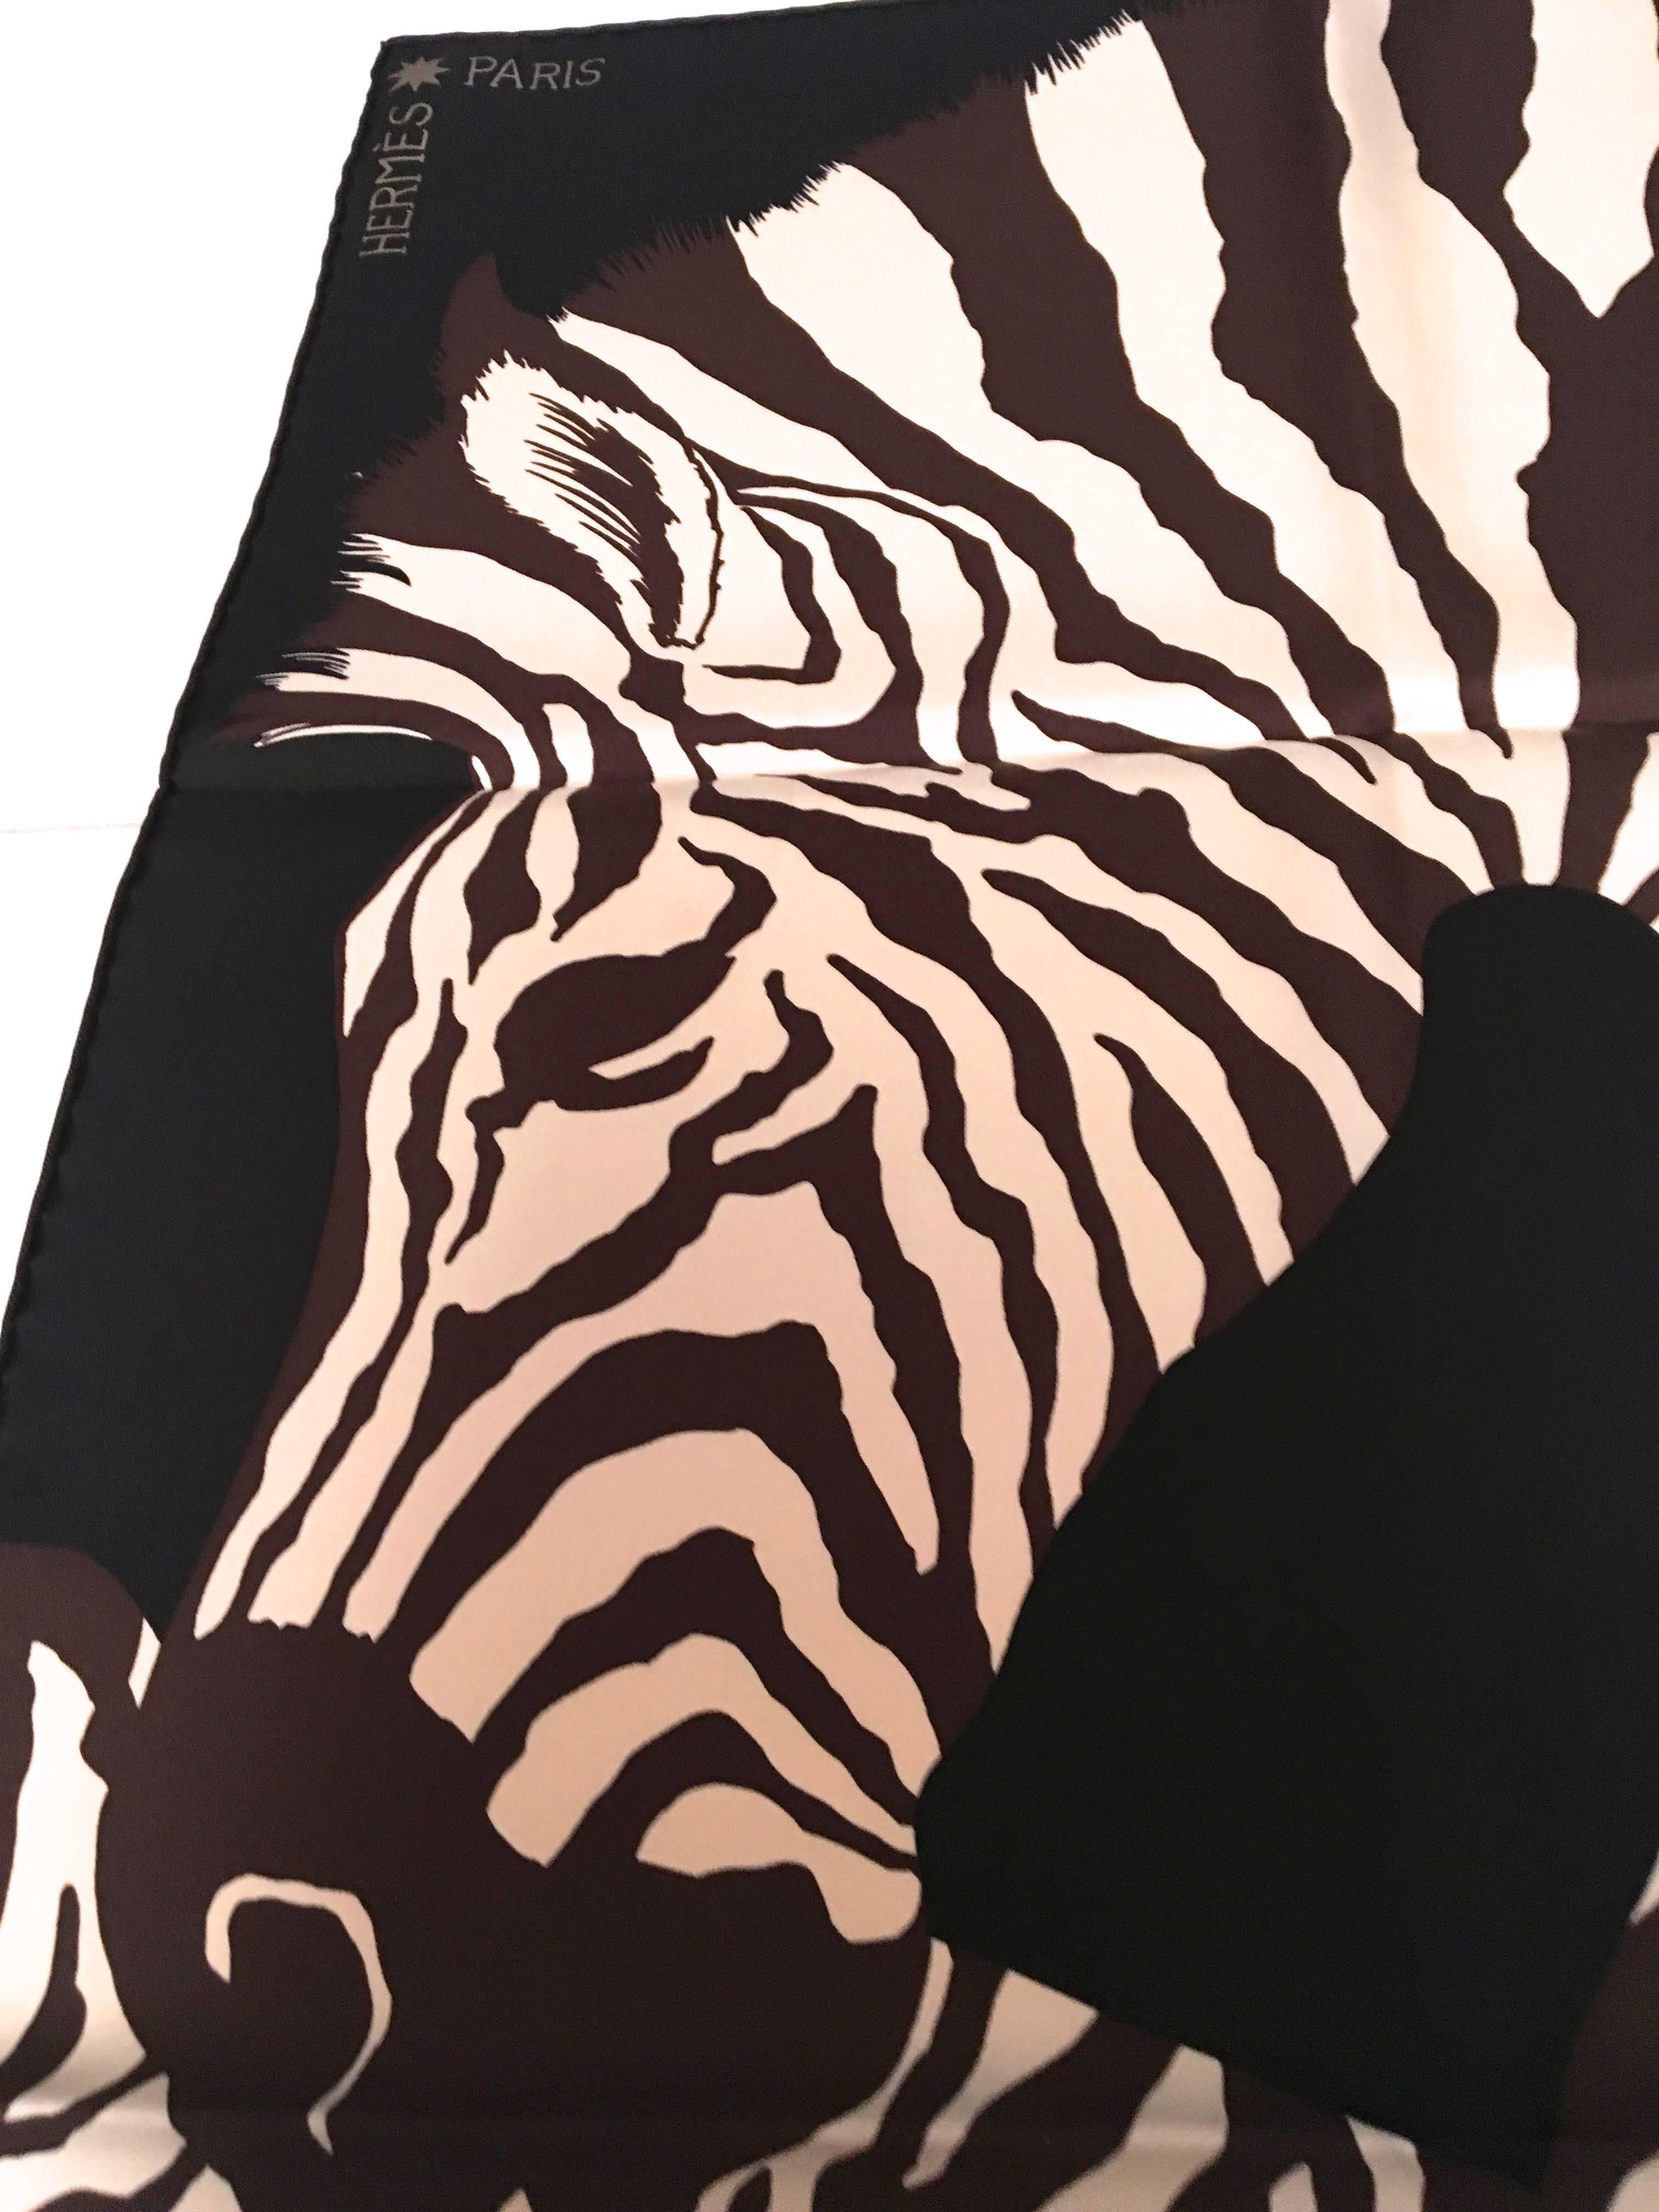 Presented here is a rare Hermes zebra pegasus scarf. The design is comprised of colors of black, brown, white and golden tones throughout the coloring of the scarf. The scarf measures 35 inches by 35 inches. The scarf is signed by Hermes in the